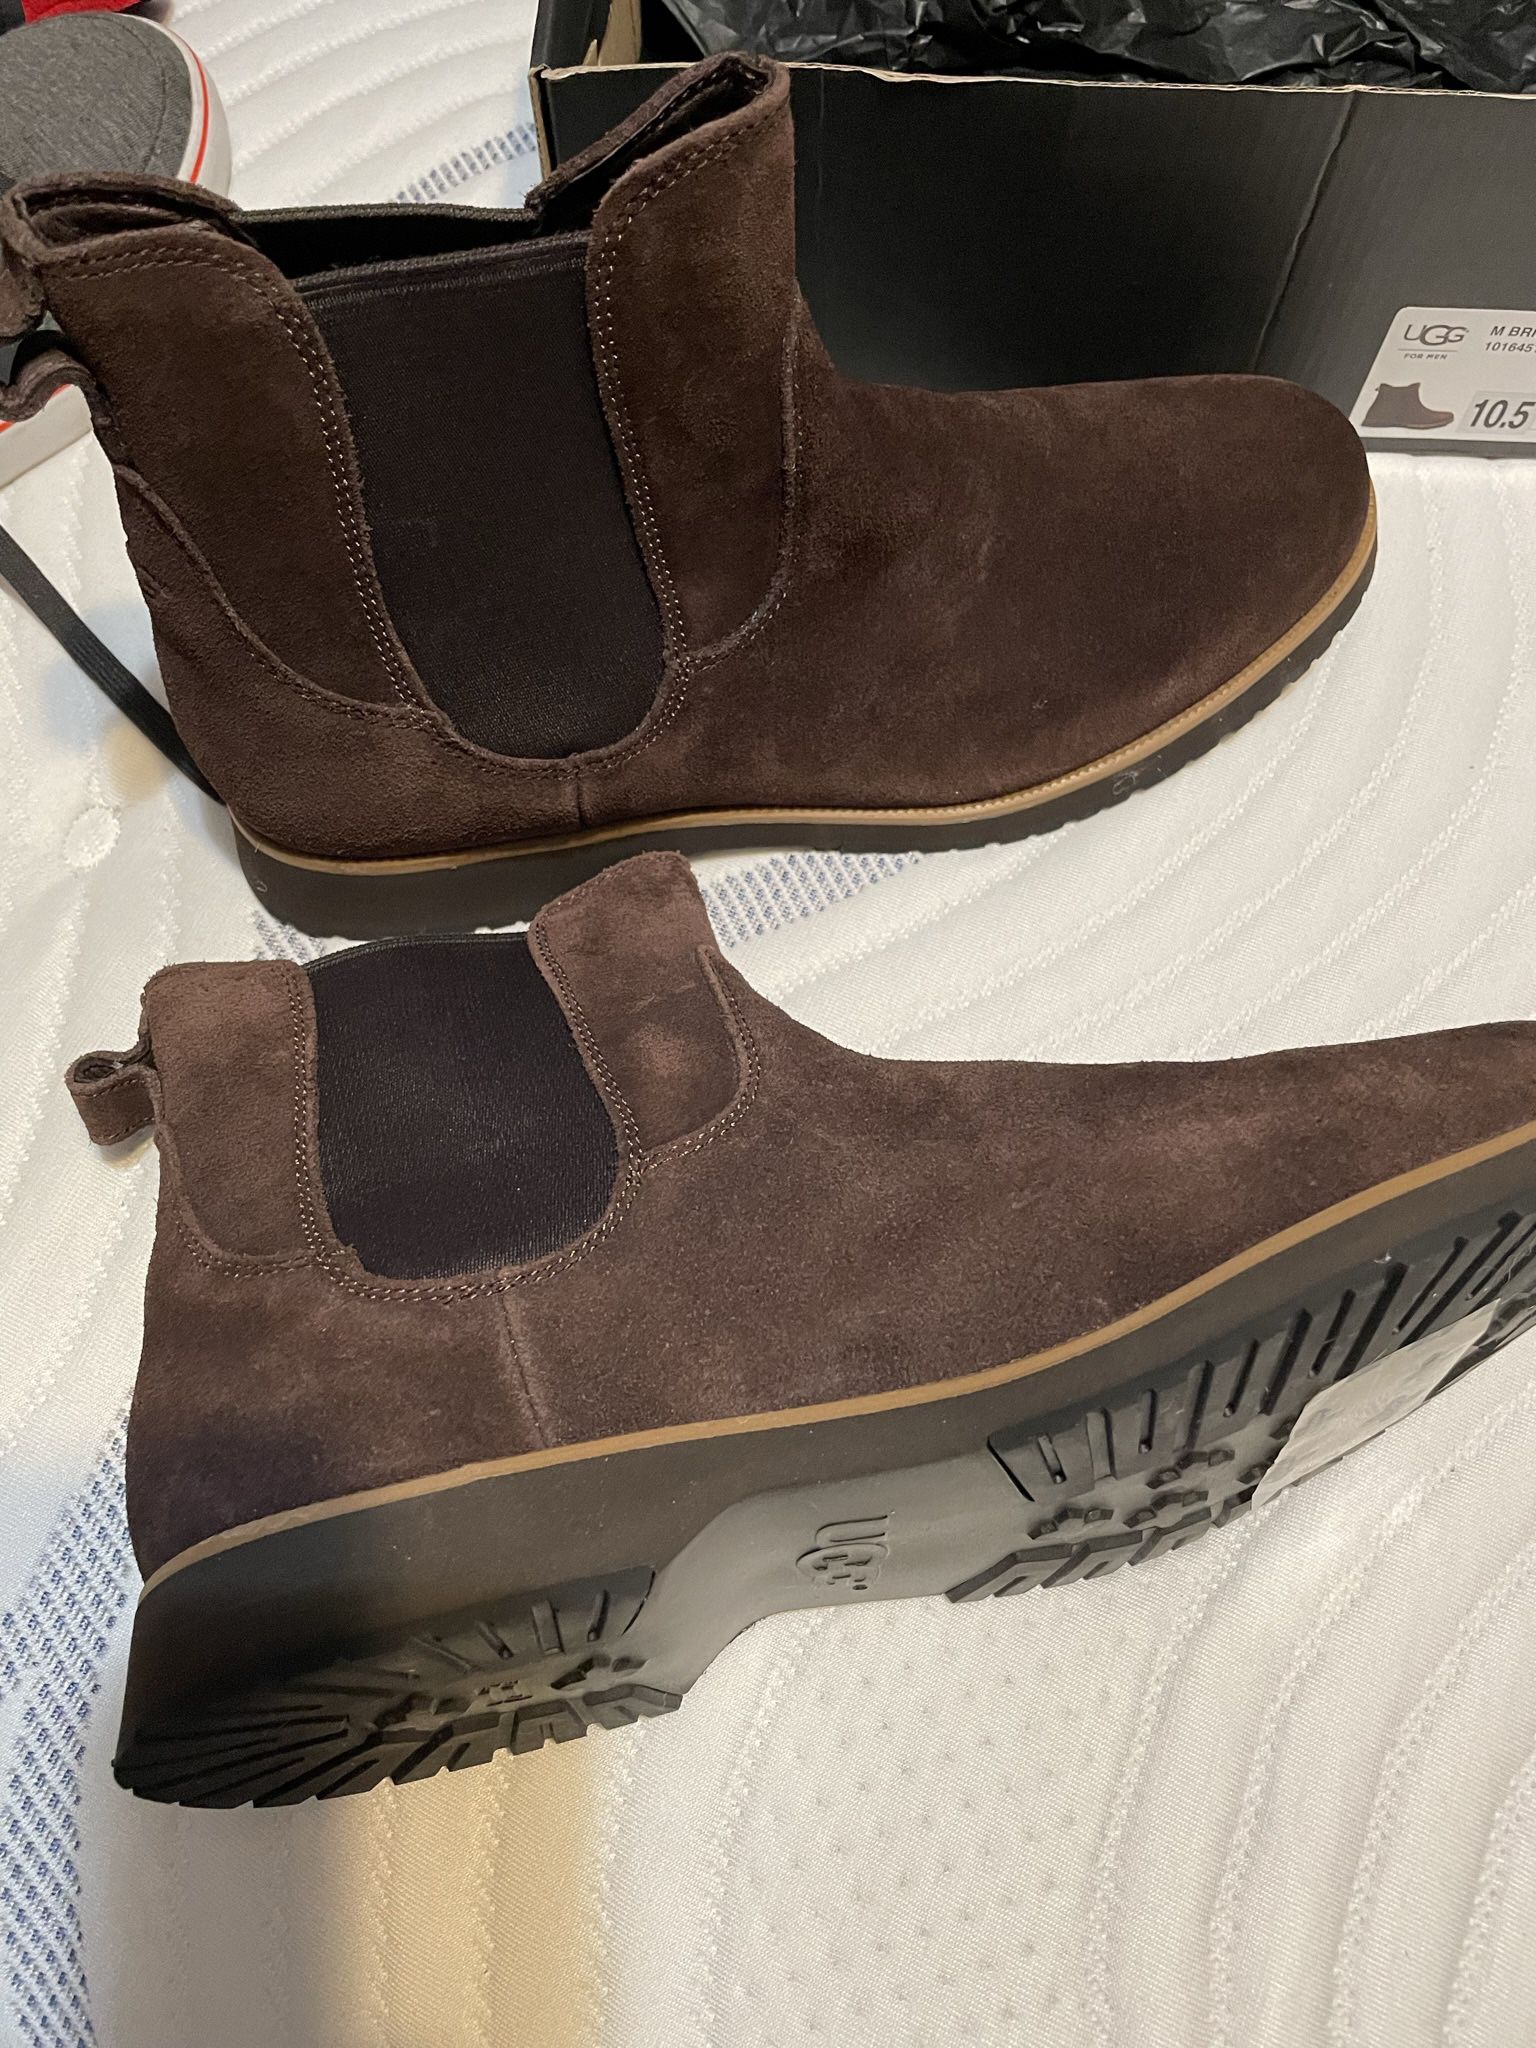 New In Box Mens Ugg Boots Size 10.5